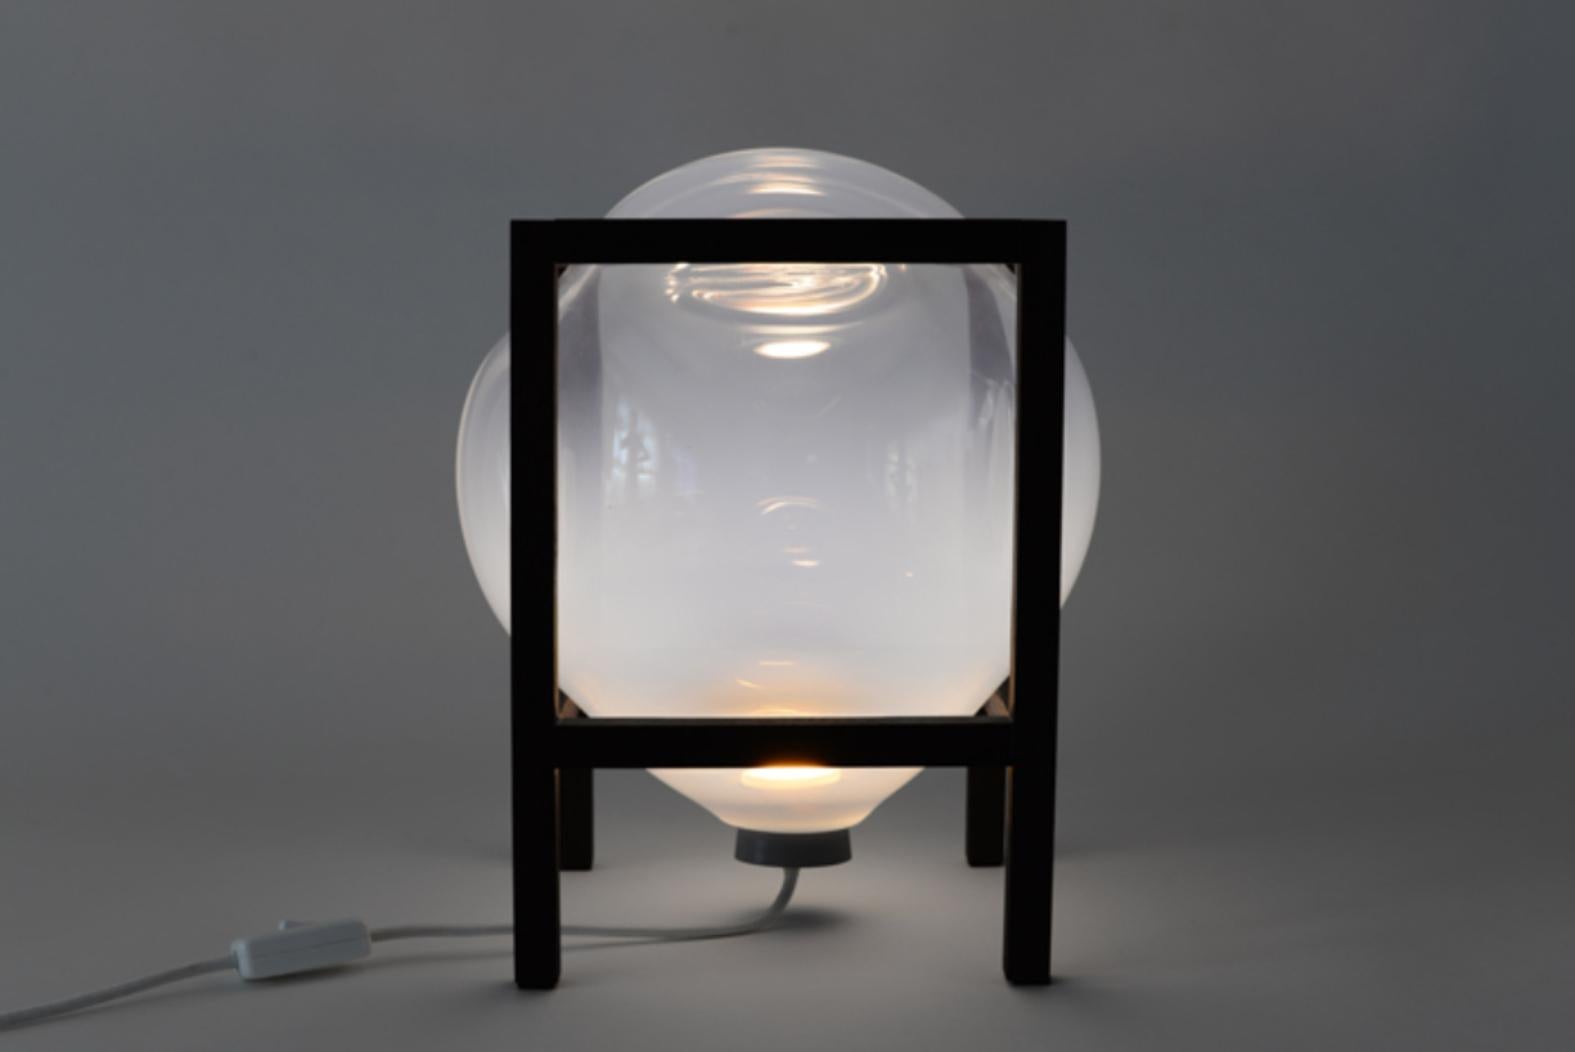 Round square white balloon table light by Studio Thier & van Daalen
Dimensions: W 24 x D 24 x H 38 cm
Materials: Wood, Glass

When blowing soap bubbles in the air Iris & Ruben had the dream to capture these temporary beauties in a tendril frame.